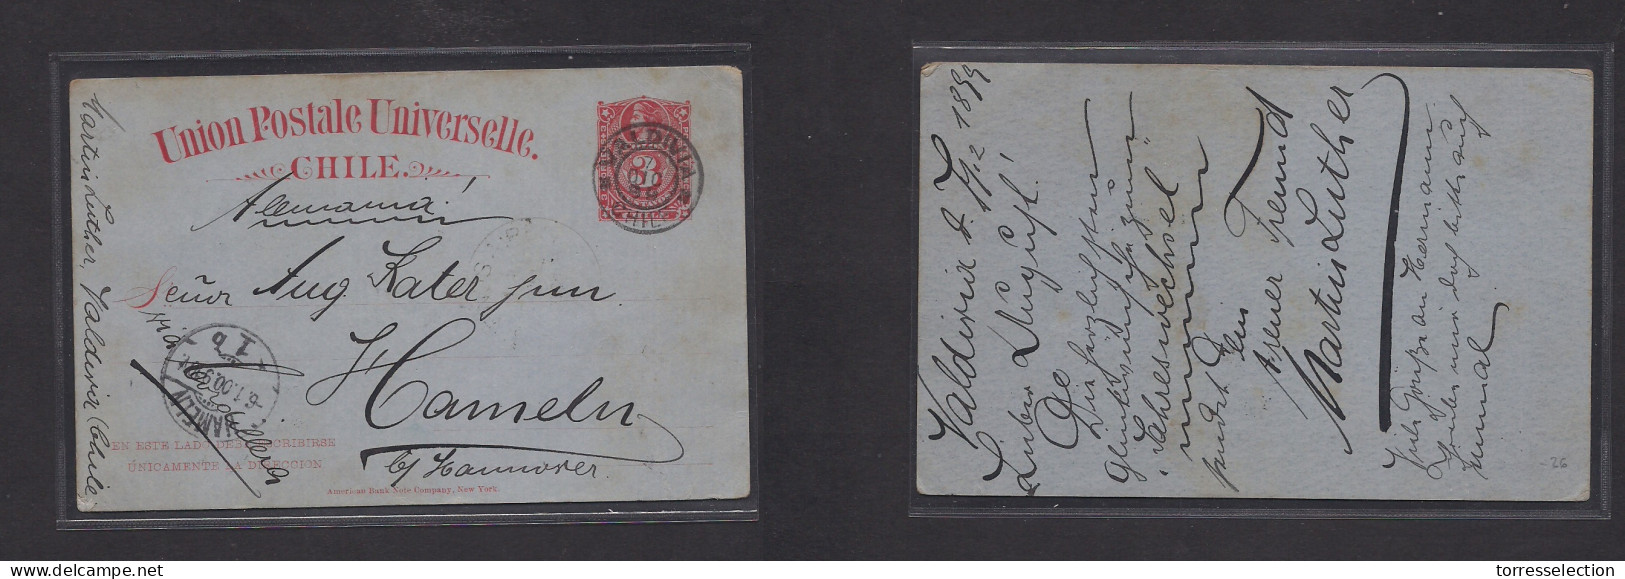 CHILE - Stationery. 1899 (7 Dic) Valdivia - Germany, Hamelin (6 Jan 1900) 3c Red Stat Card. Fine Used. - Chili